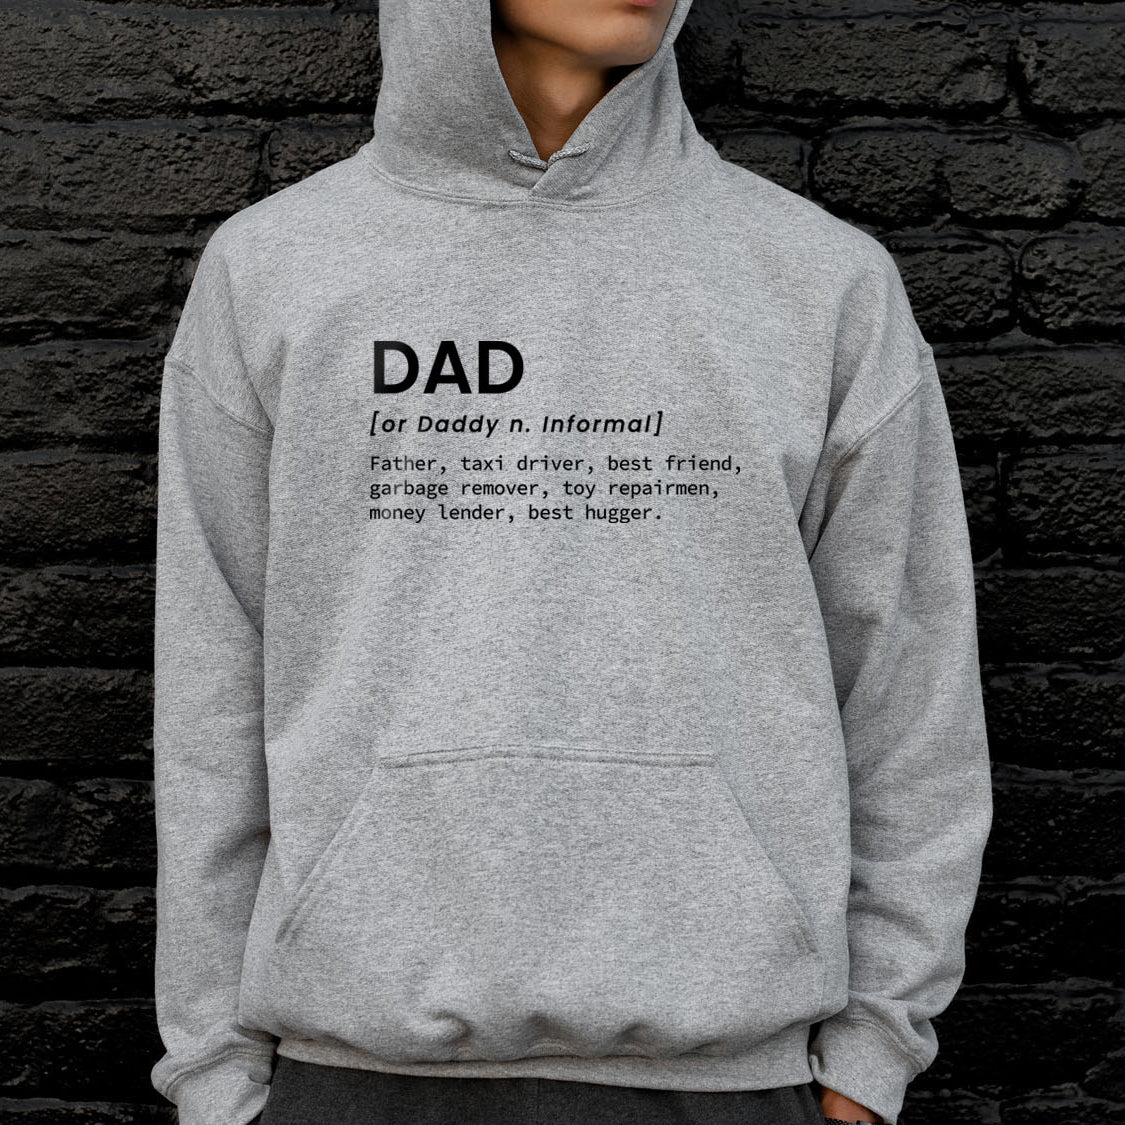 Funny Definition of Dad Hoodie - Funny Family Retro Vintage Design Printed Hoodie